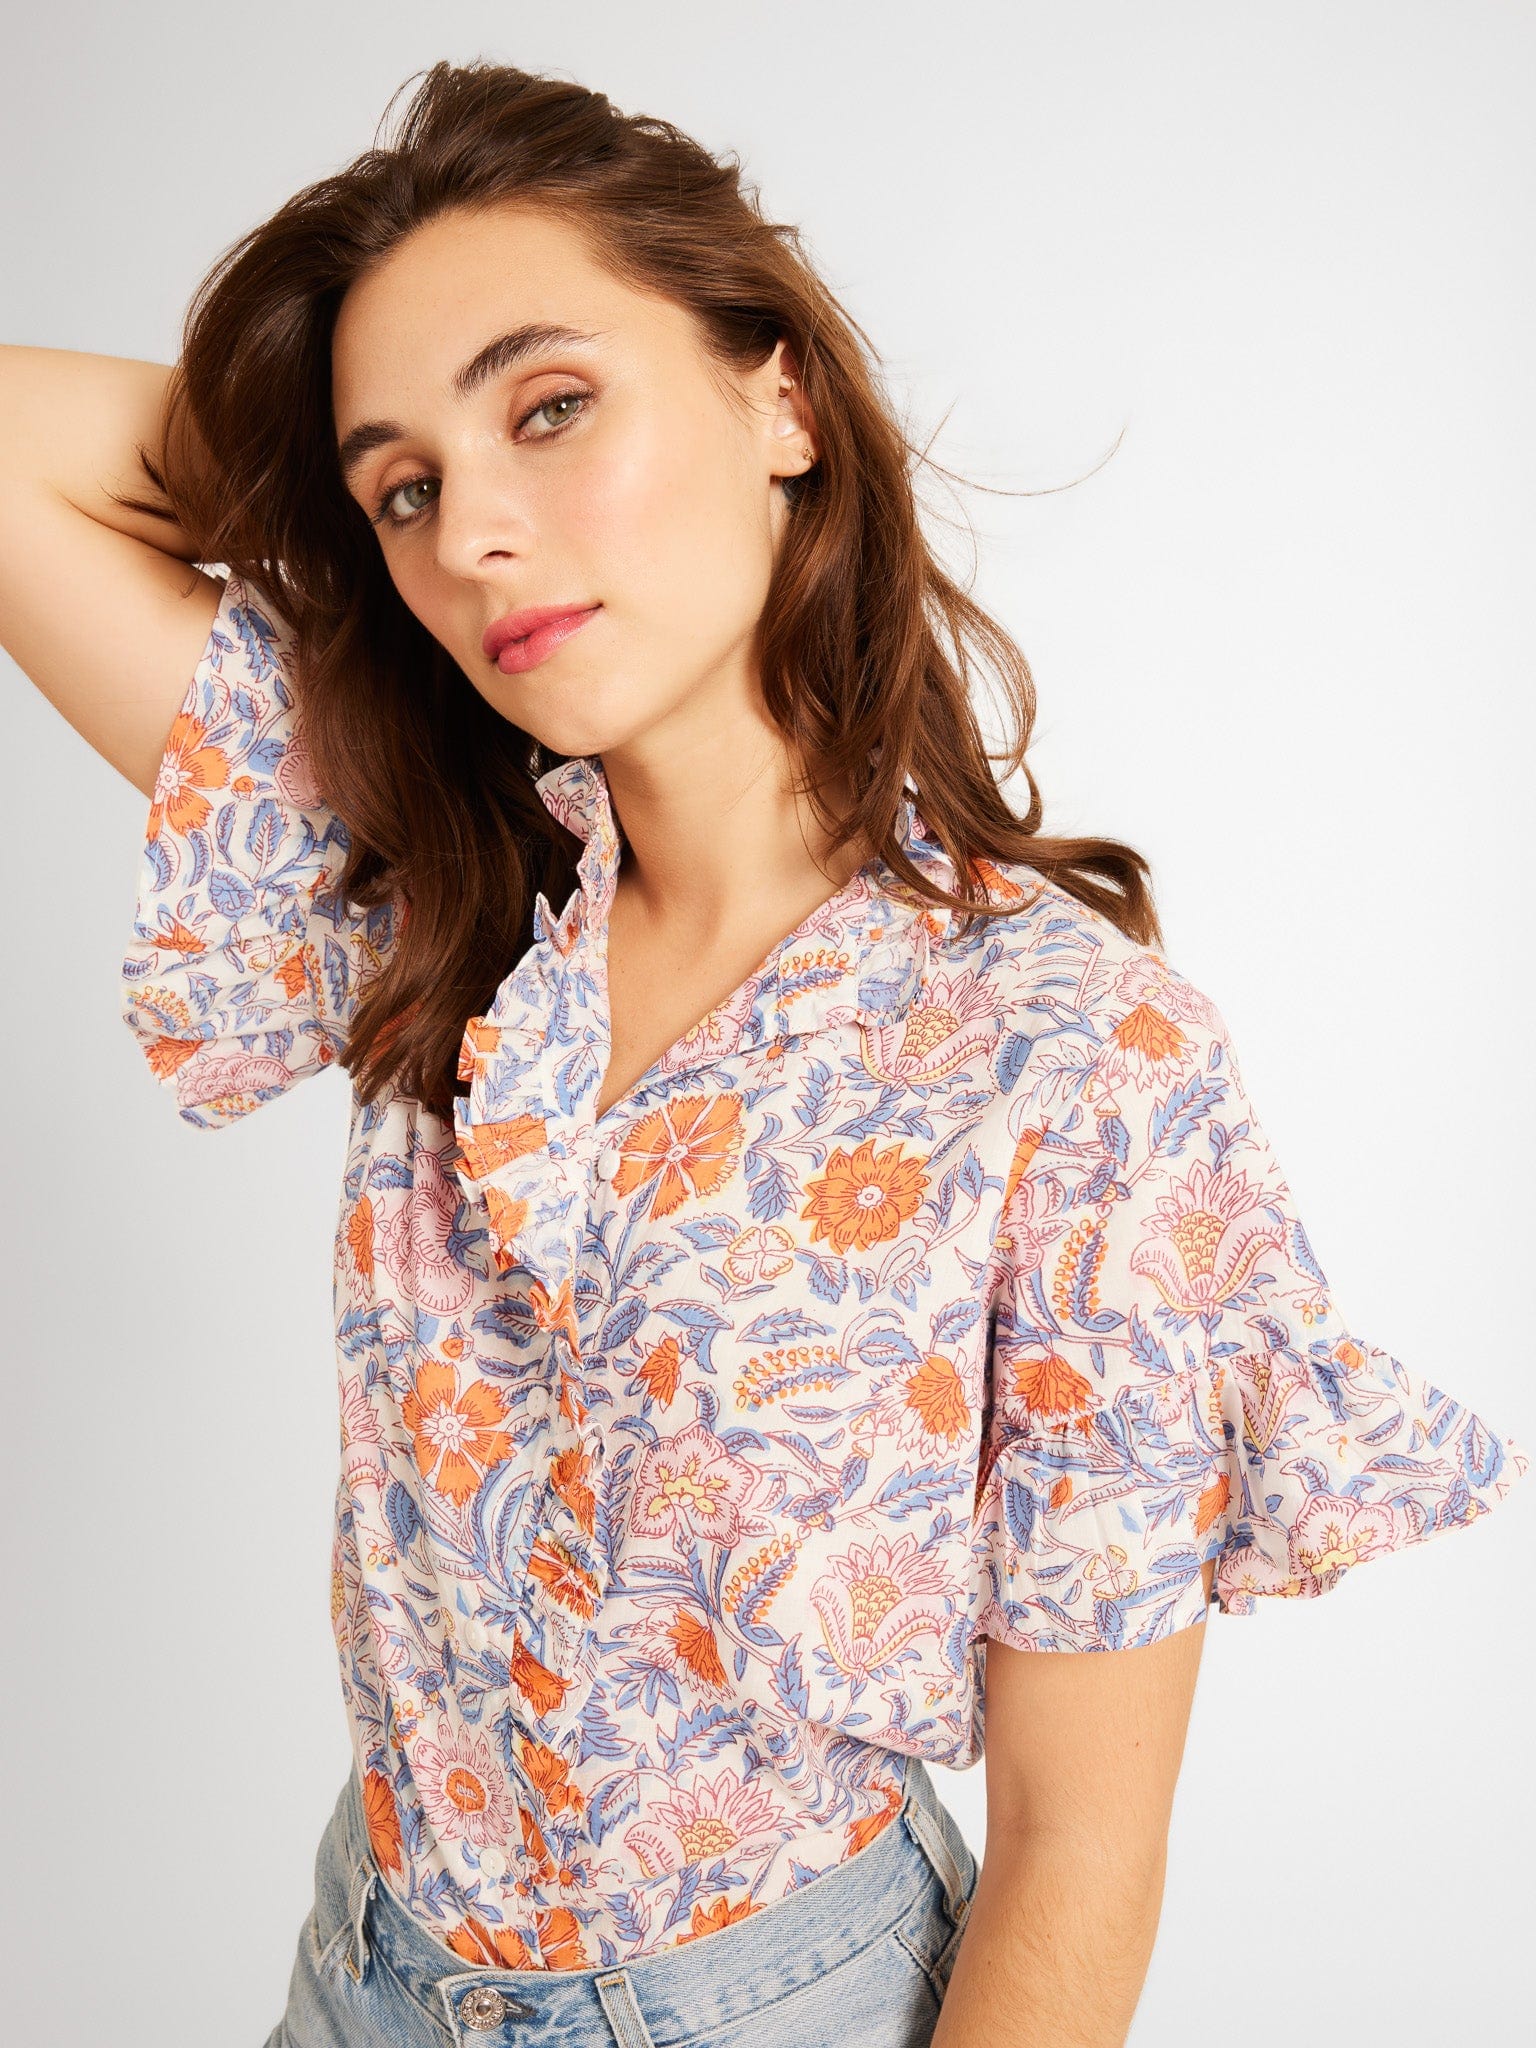 MILLE Clothing Vanessa Top in Newport Floral